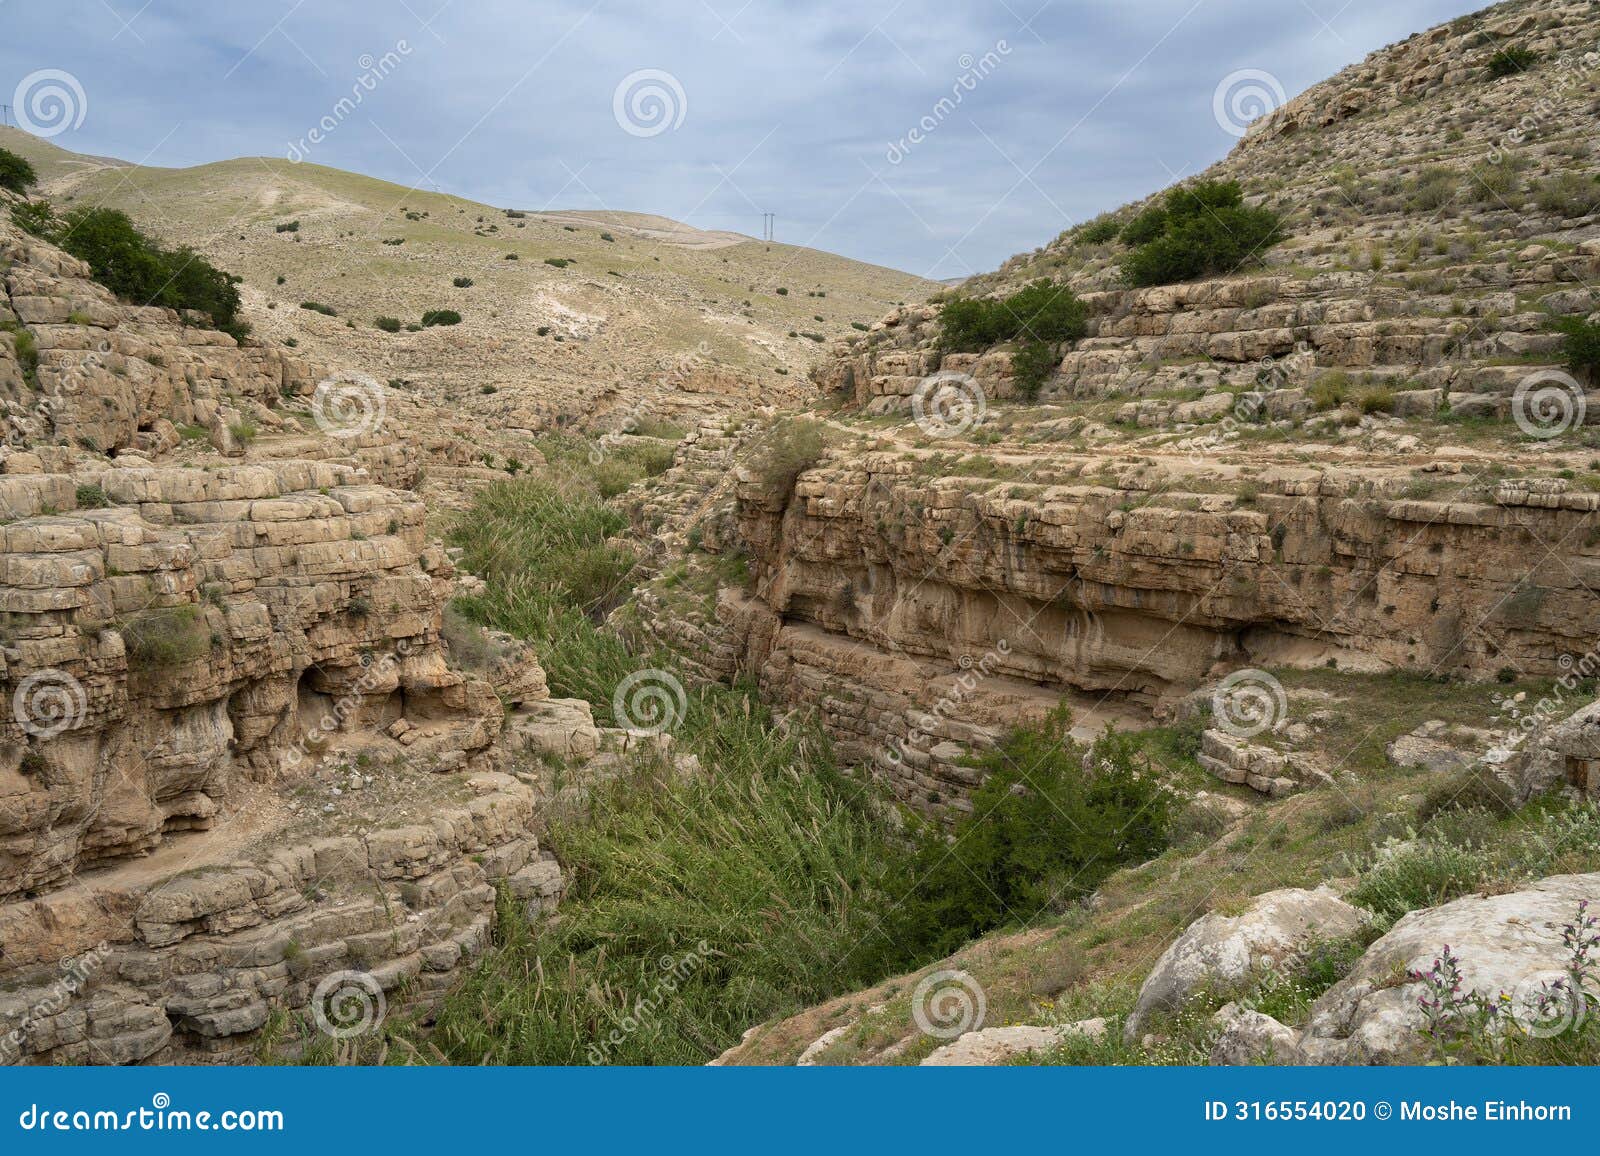 a landscape on the bank of the prat stream, israel